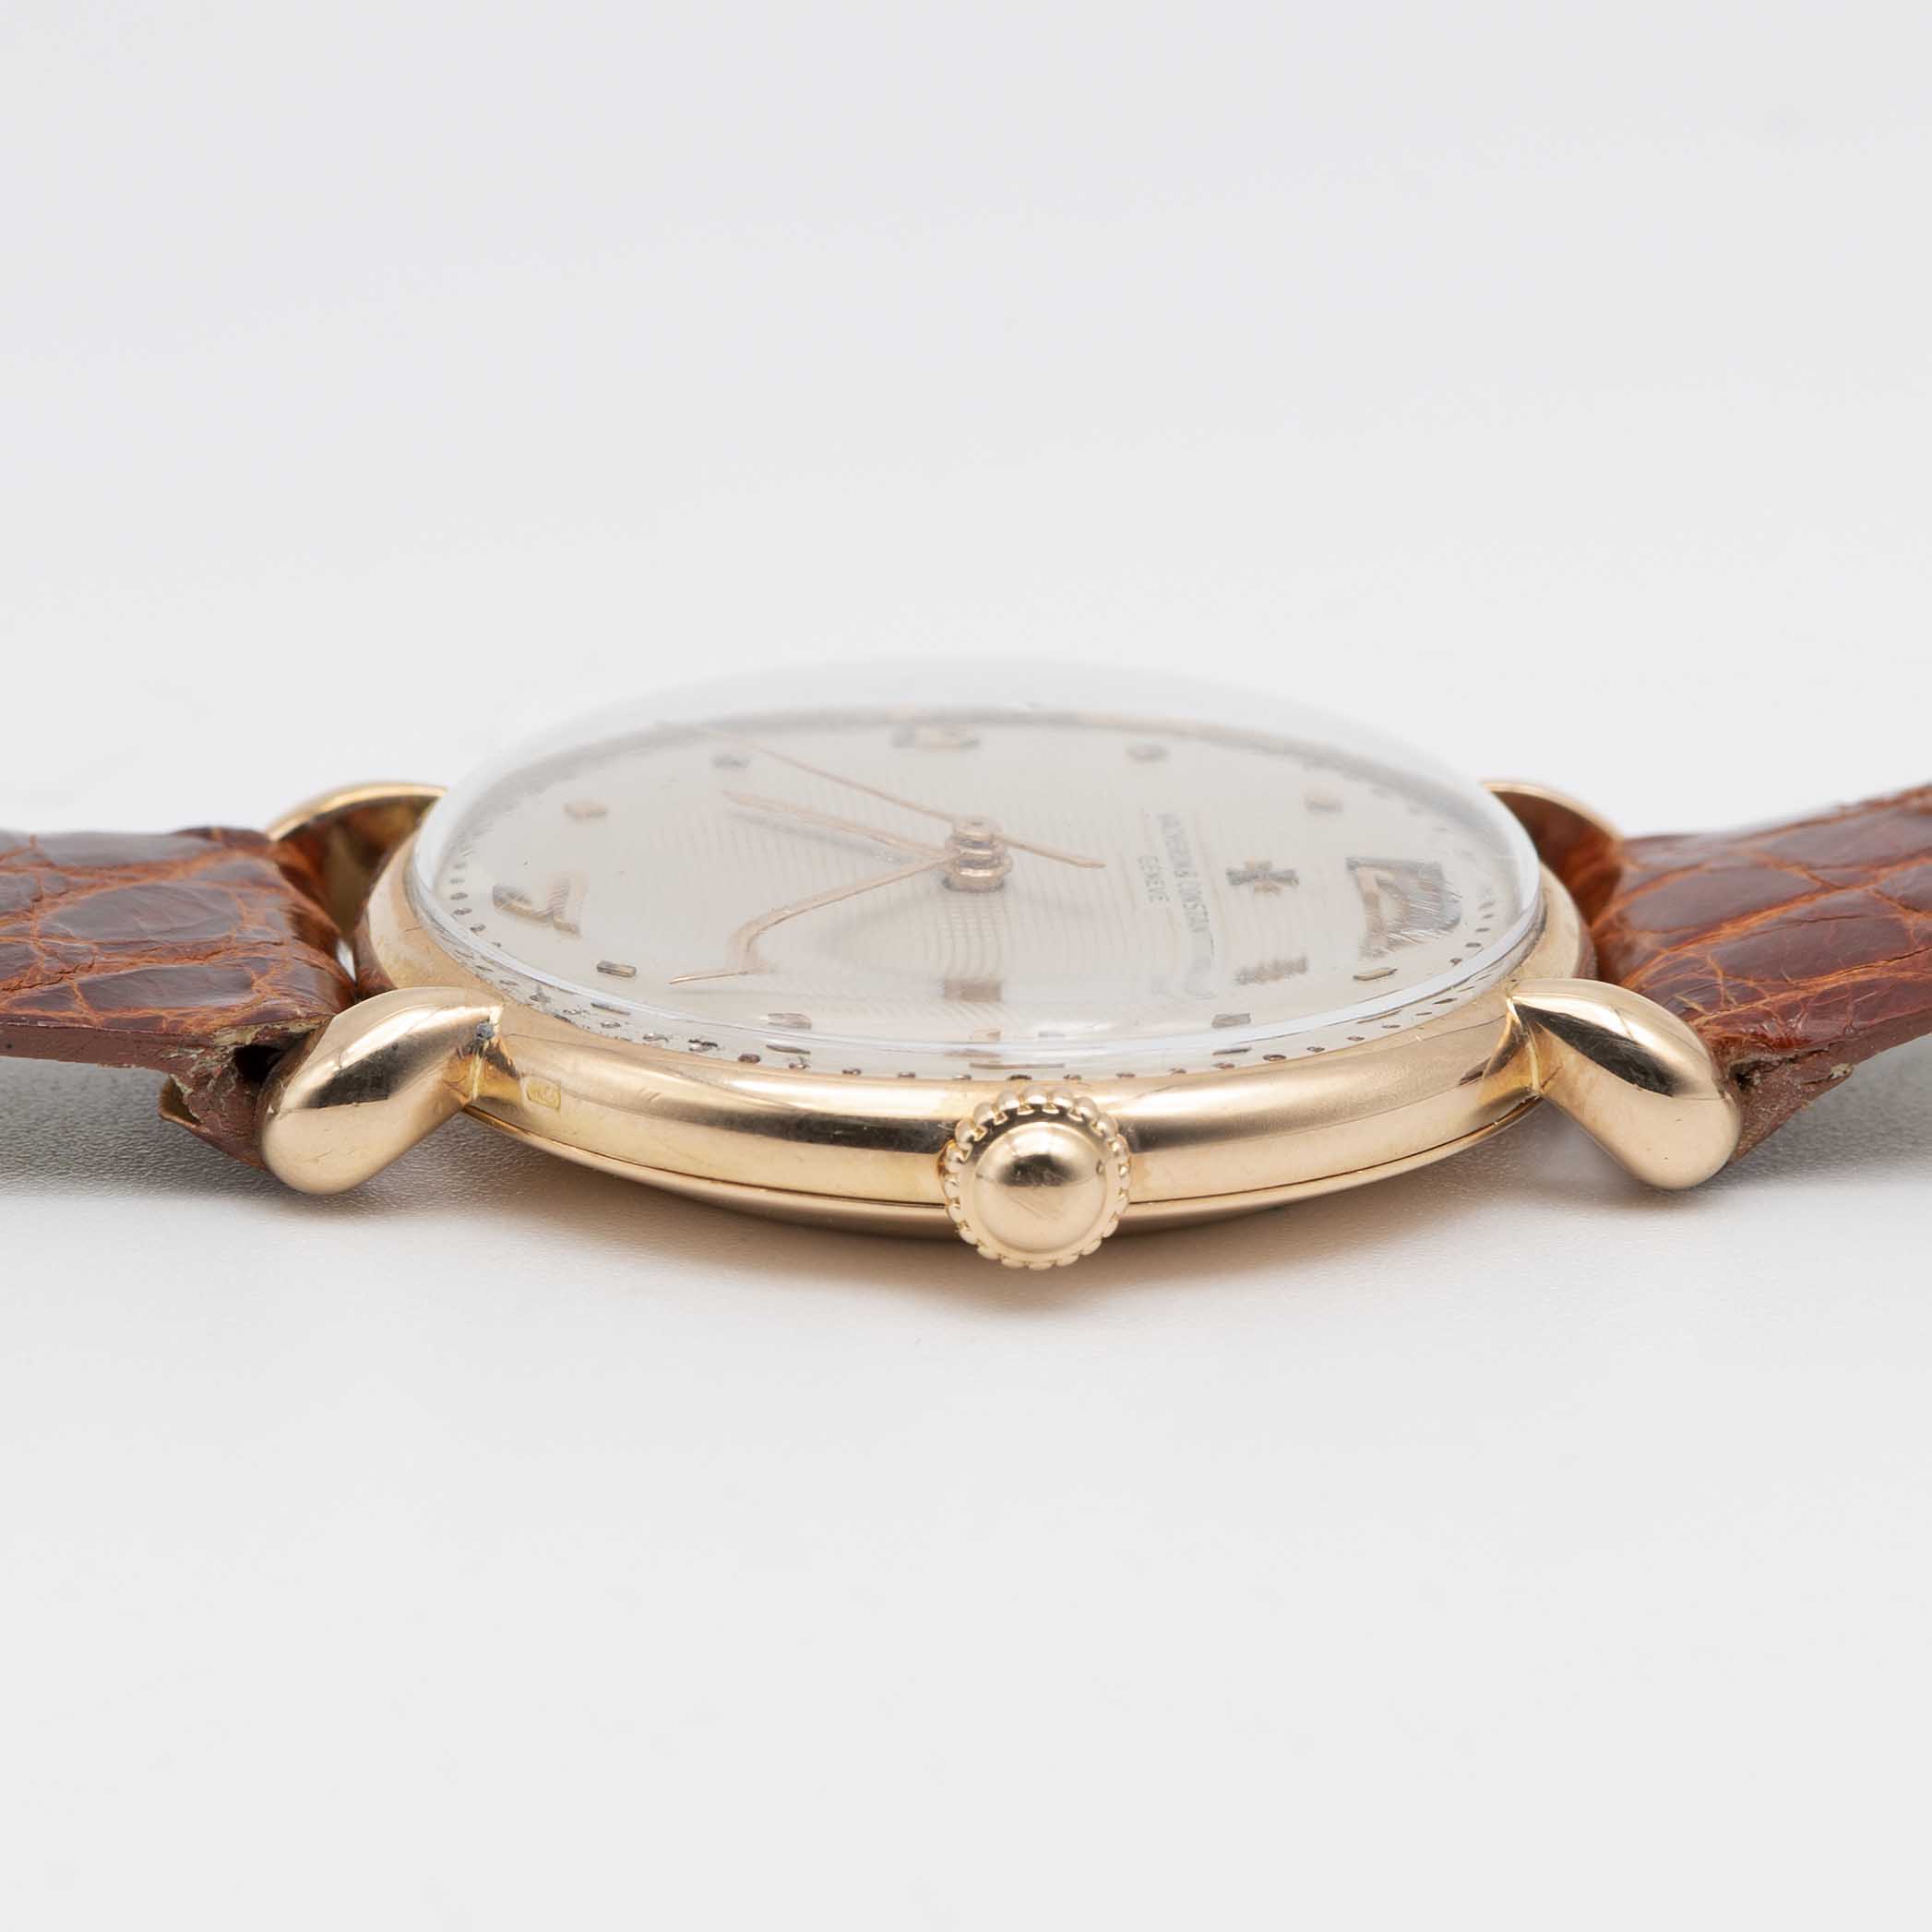 A GENTLEMAN'S 18K SOLID ROSE GOLD VACHERON & CONSTANTIN WRIST WATCH CIRCA 1950s, WITH GUILLOCHE DIAL - Image 7 of 8